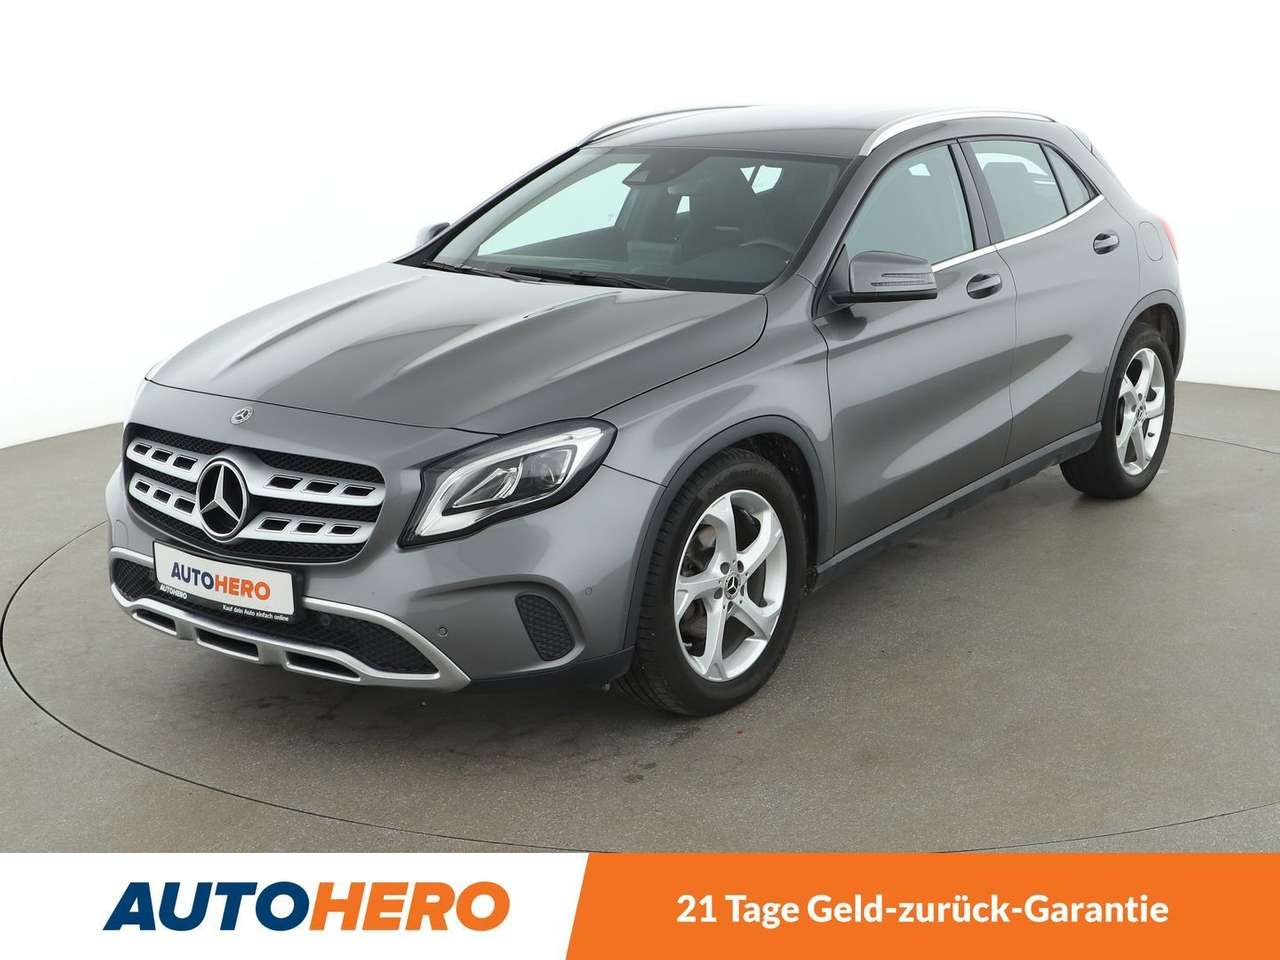 Used Mercedes Benz Gla-Class 200